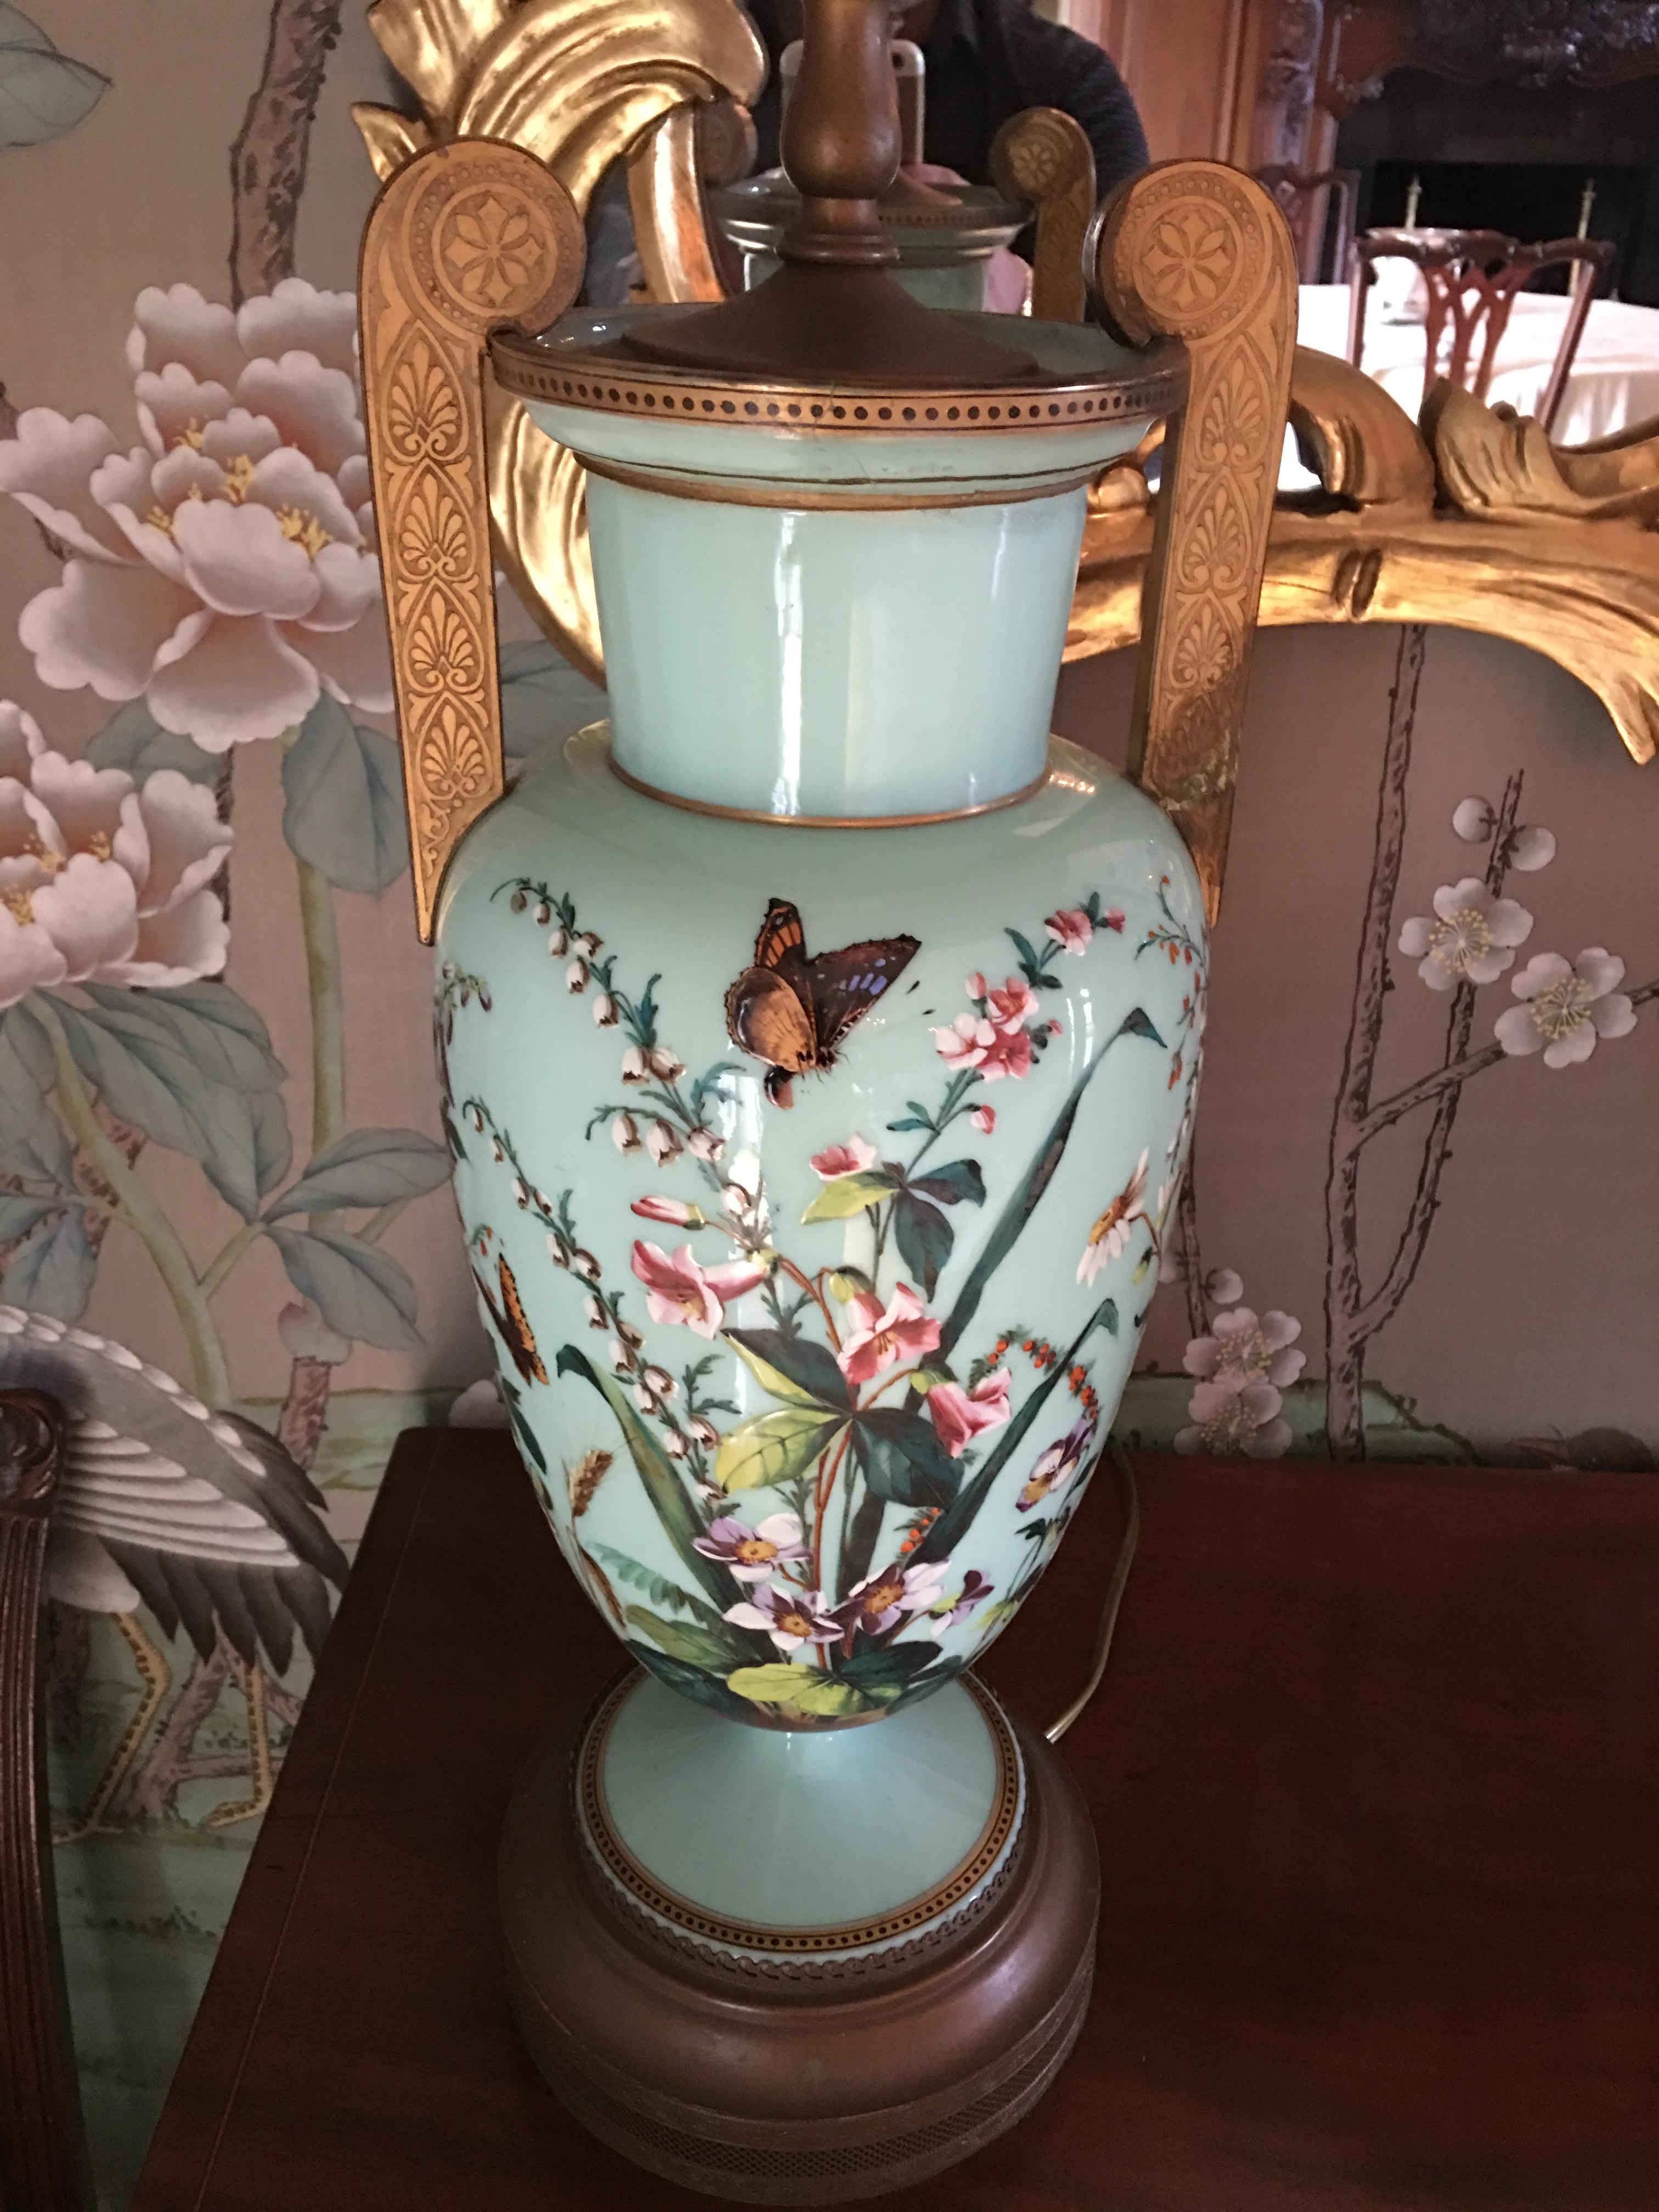 20th century pair of porcelain lamps in an aqua color background with flowers and butterflies design on metal gold vases.